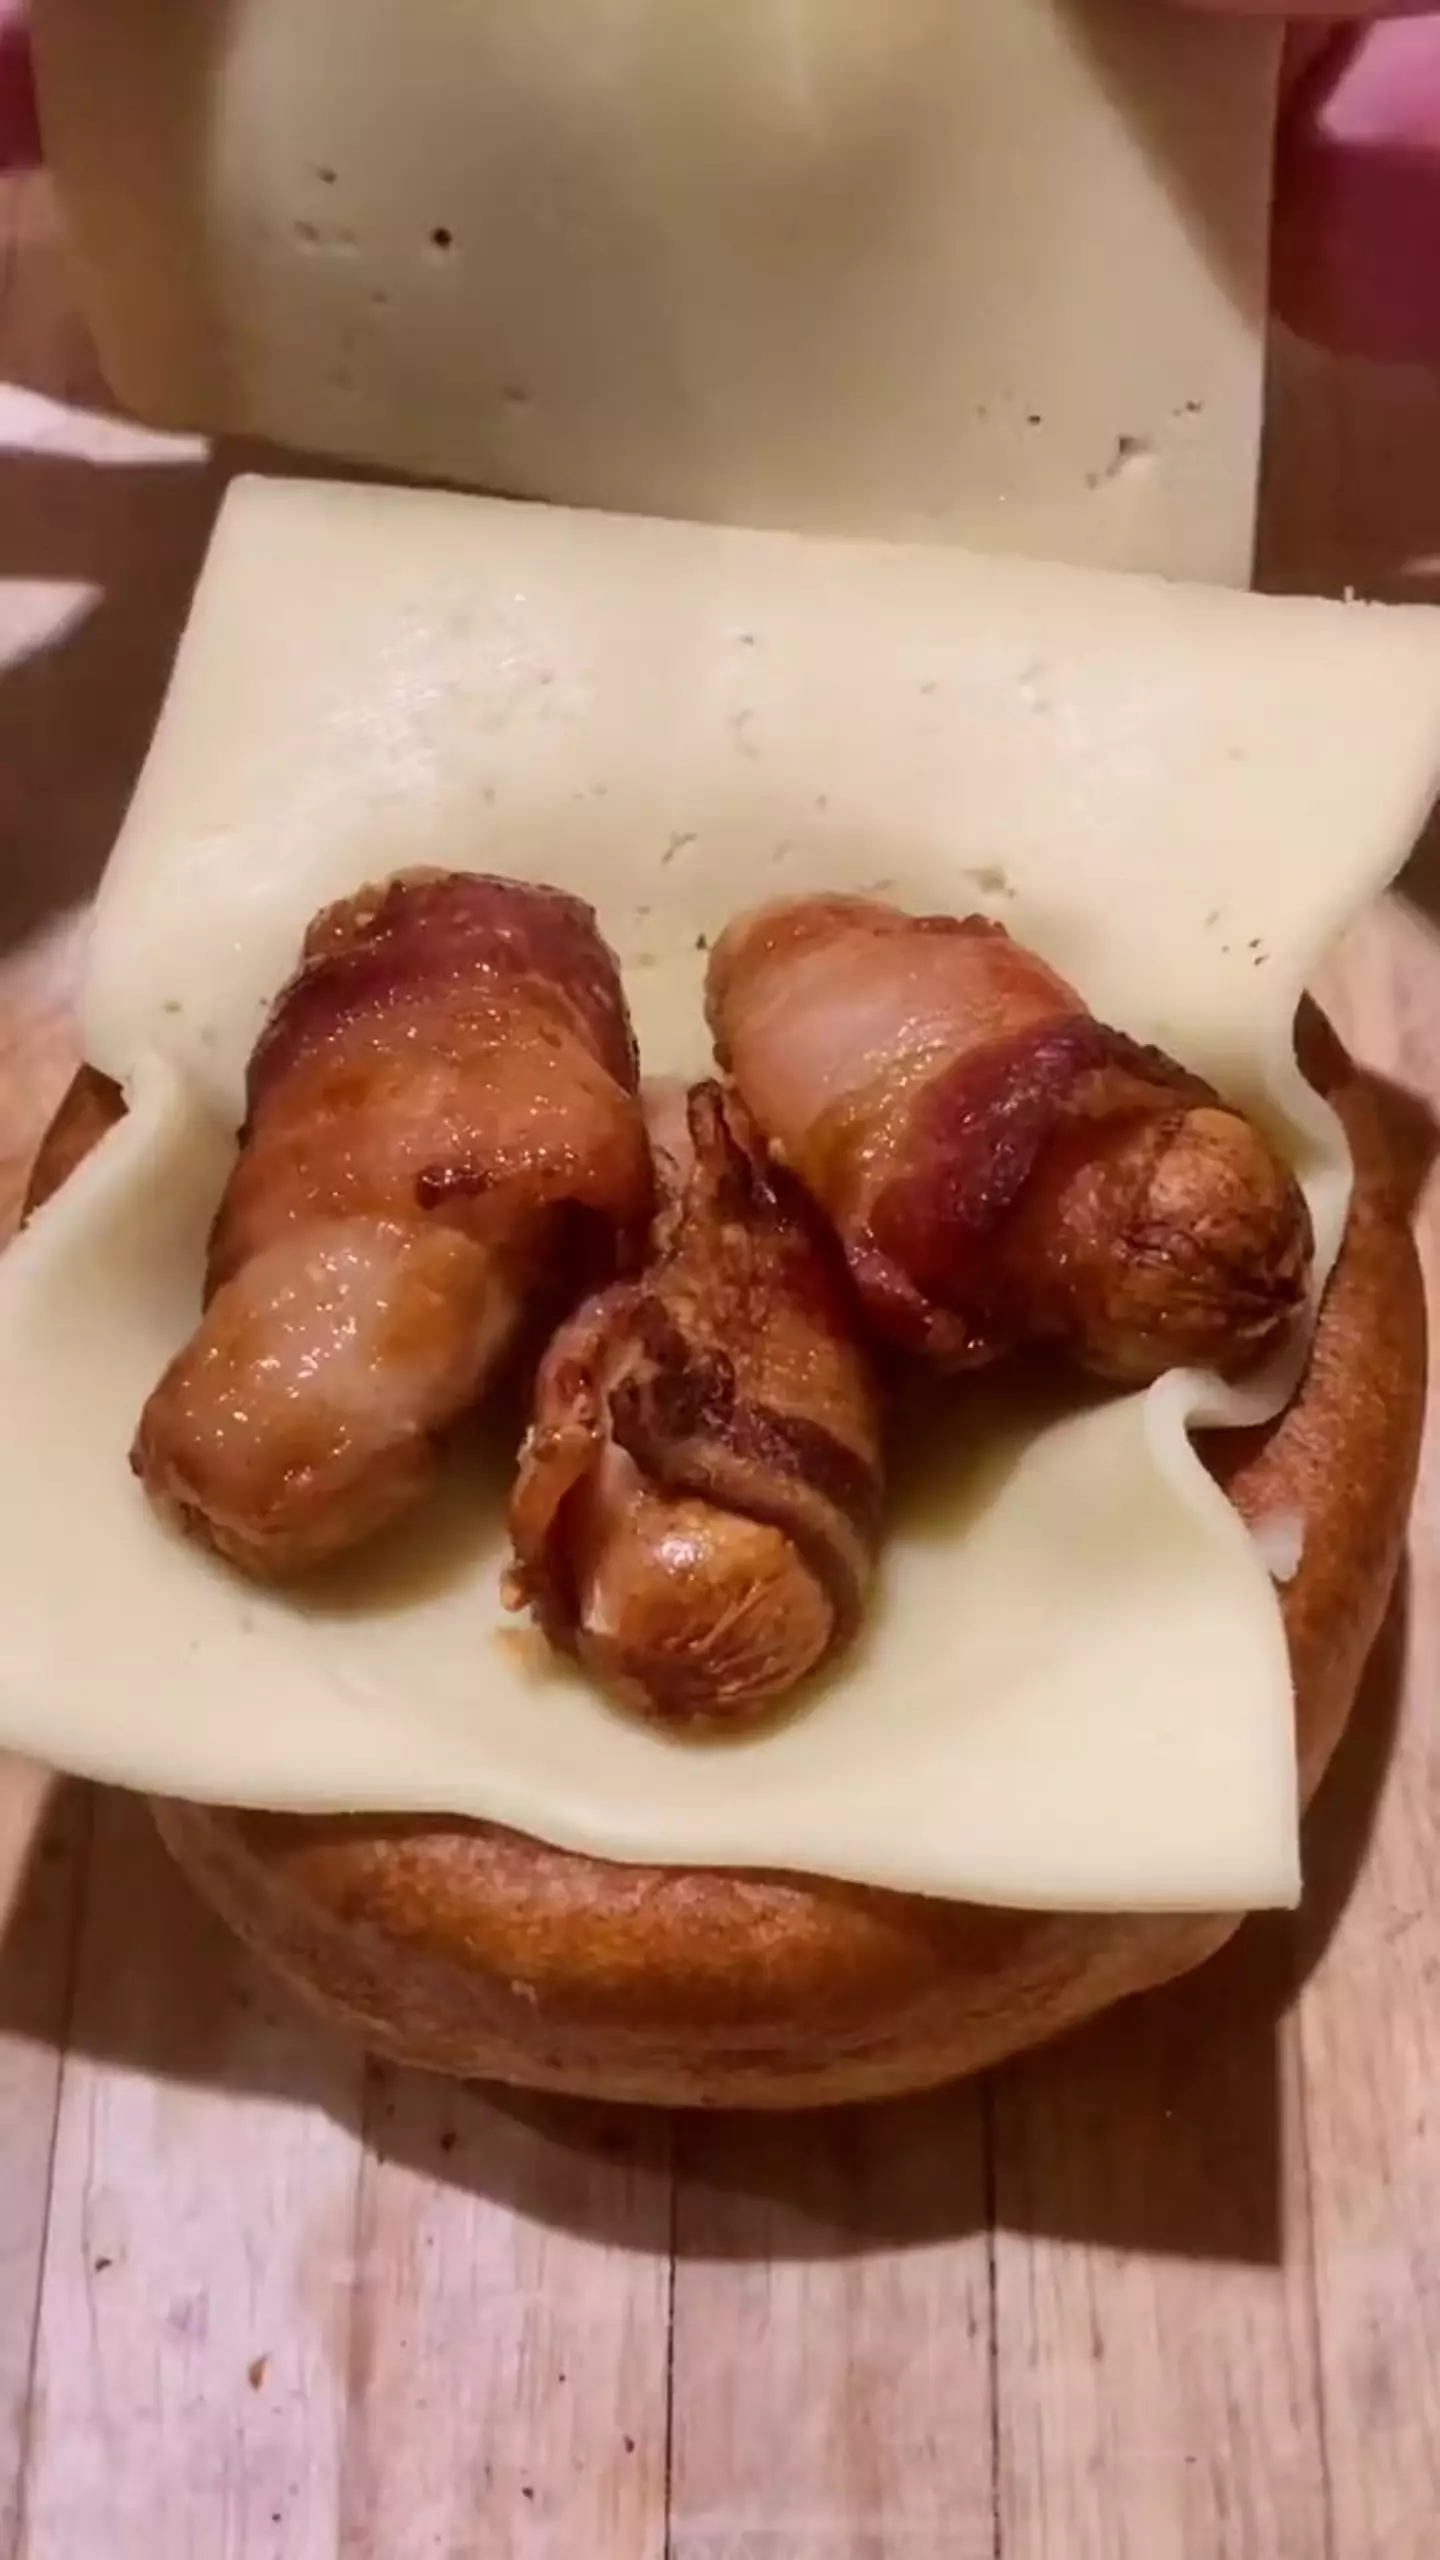 There's pigs in blankets too (